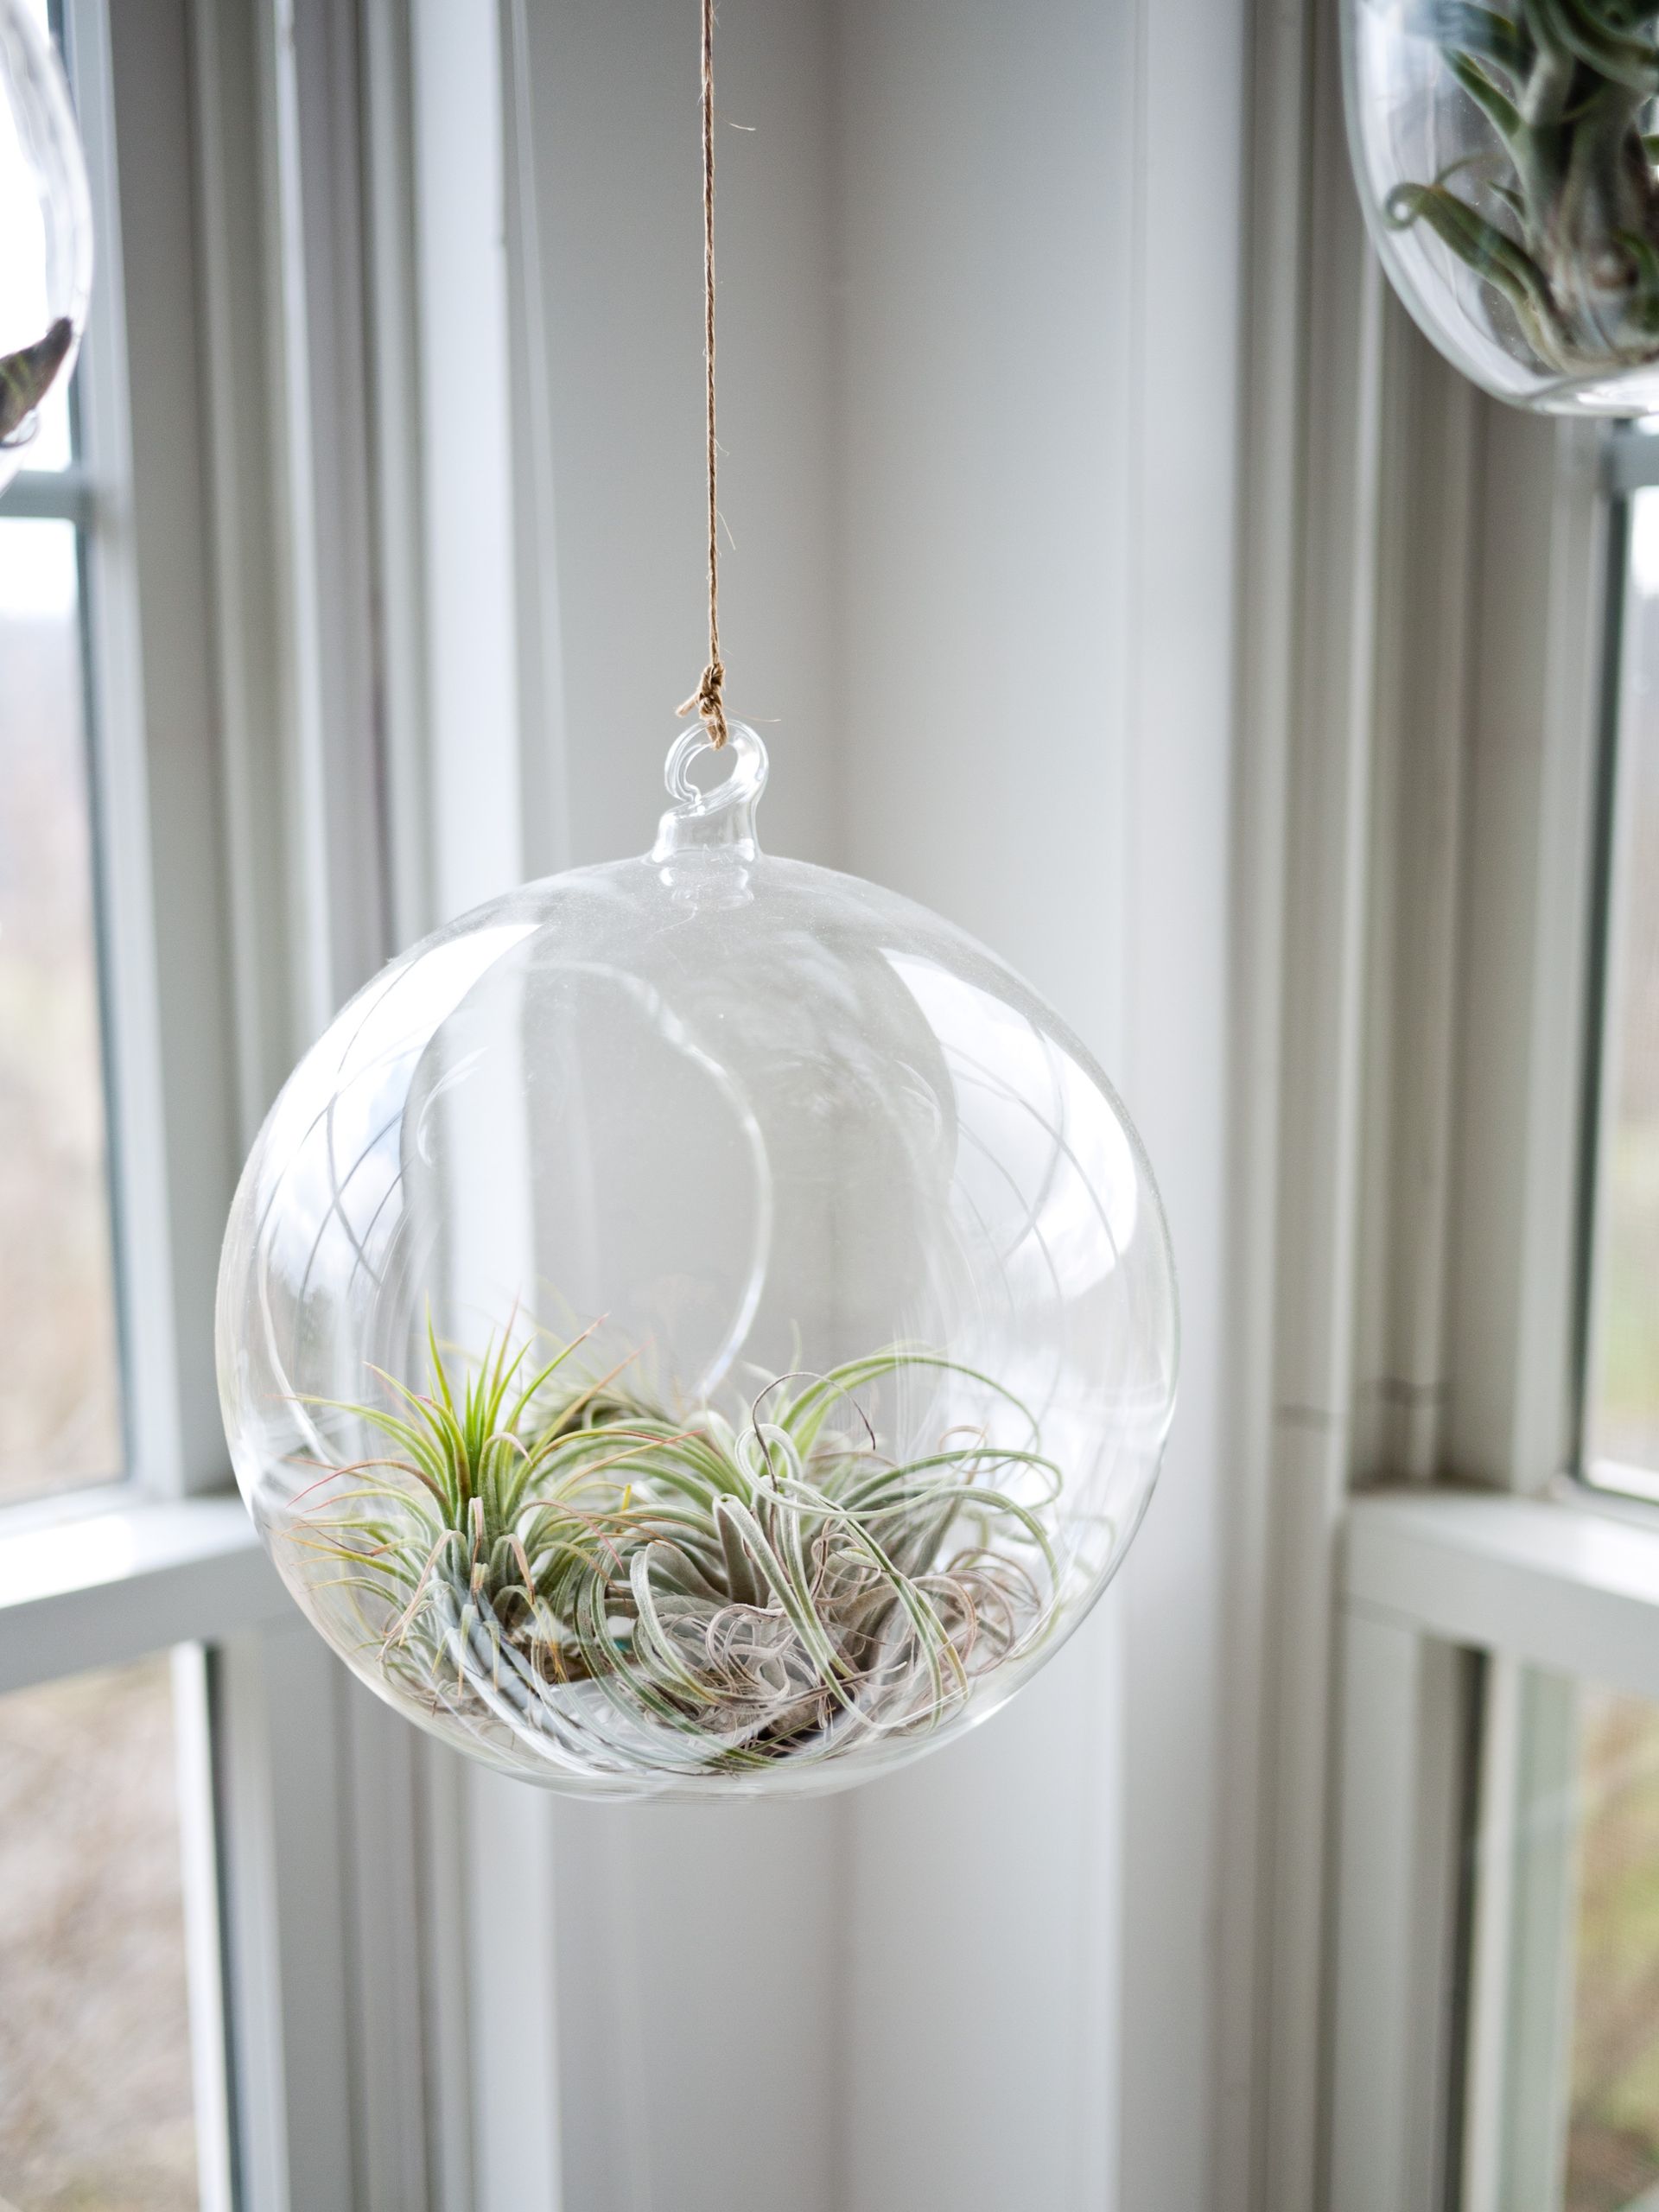 A glass ball filled with air plants is hanging from a window.